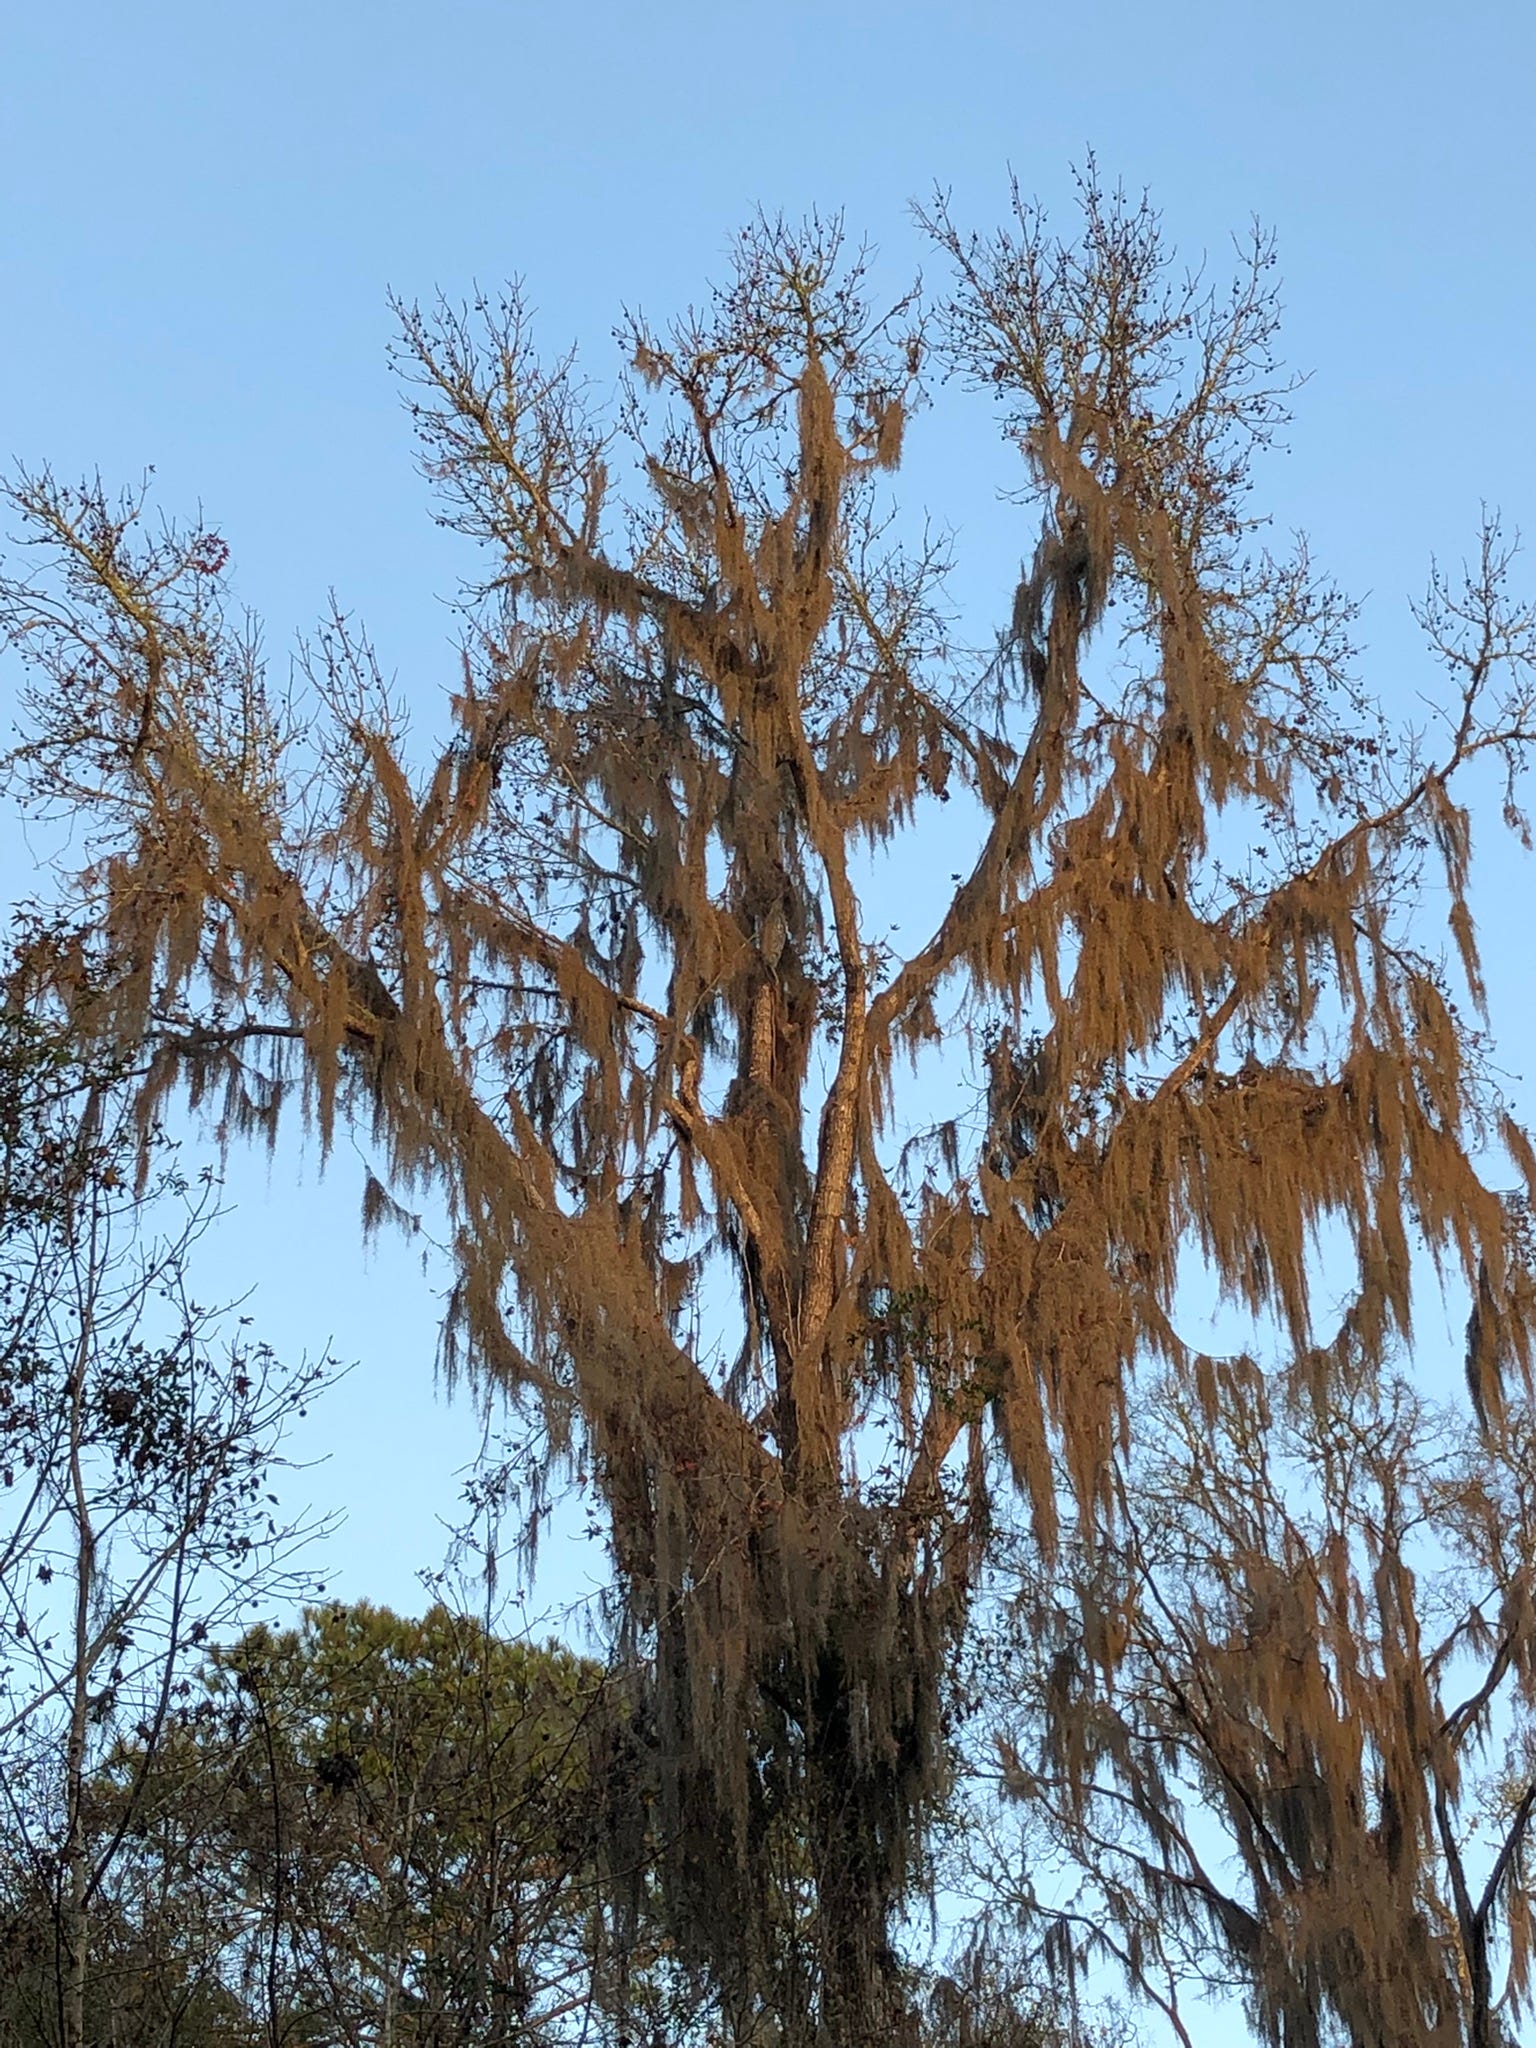 What is Spanish moss? Where did it come from & what is it for